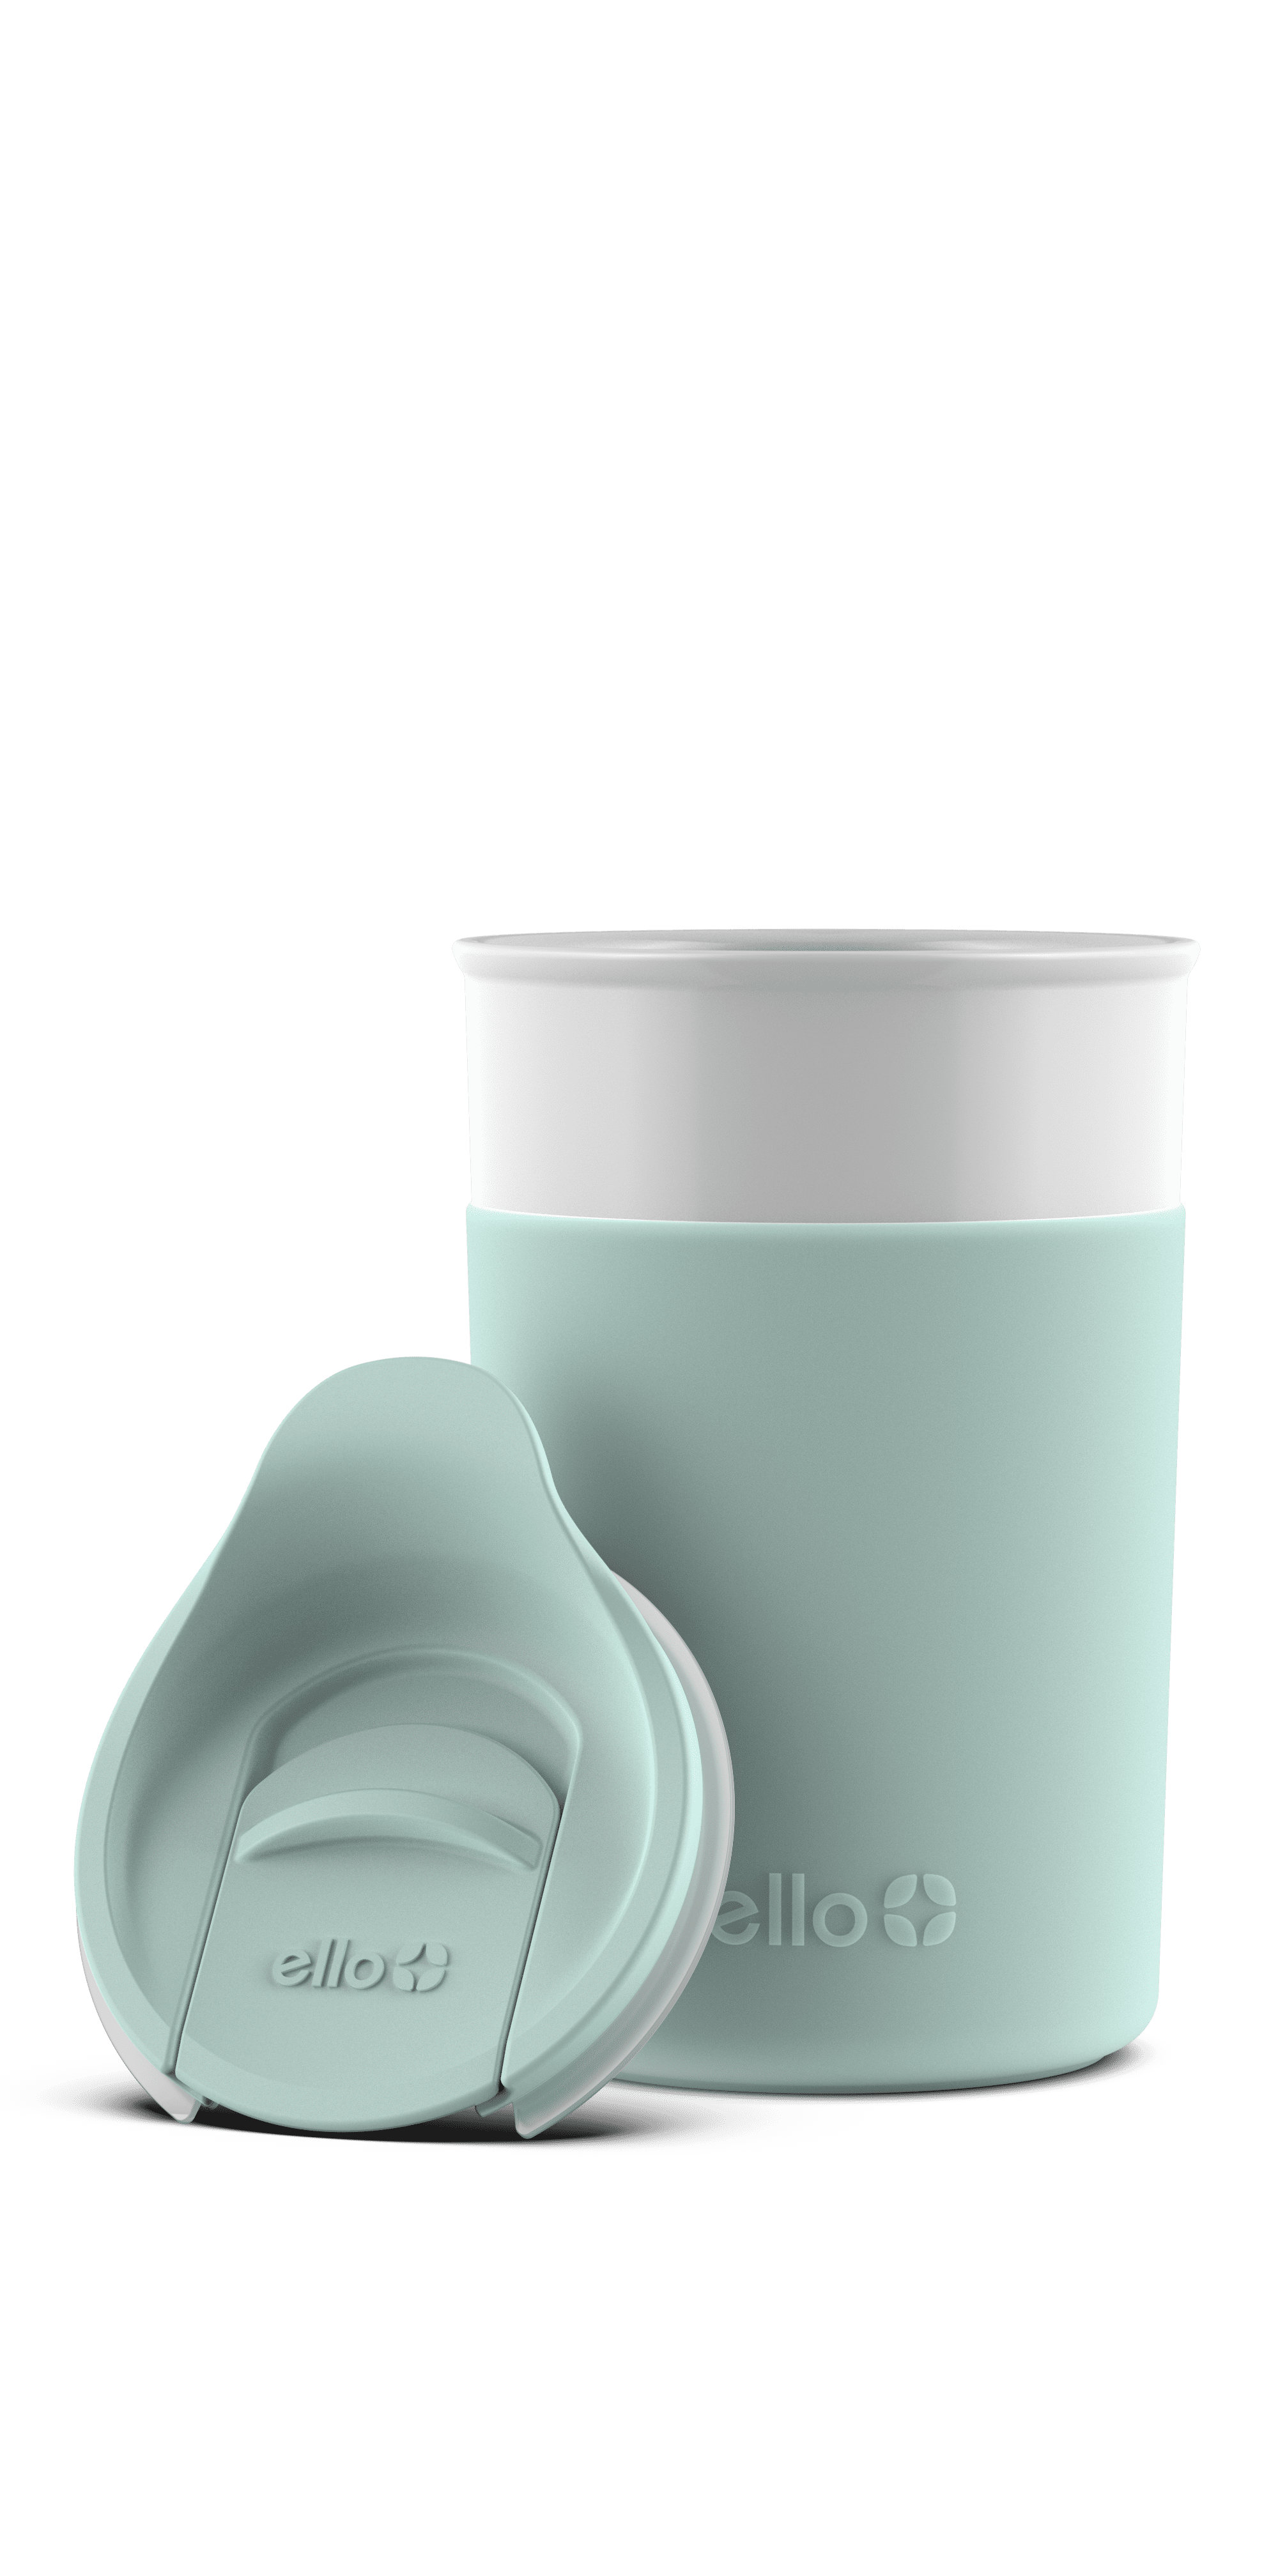 Dropship Ello Cool Gray Archie Ceramic Thermos Mug With Lid, 11 Fl Oz to  Sell Online at a Lower Price